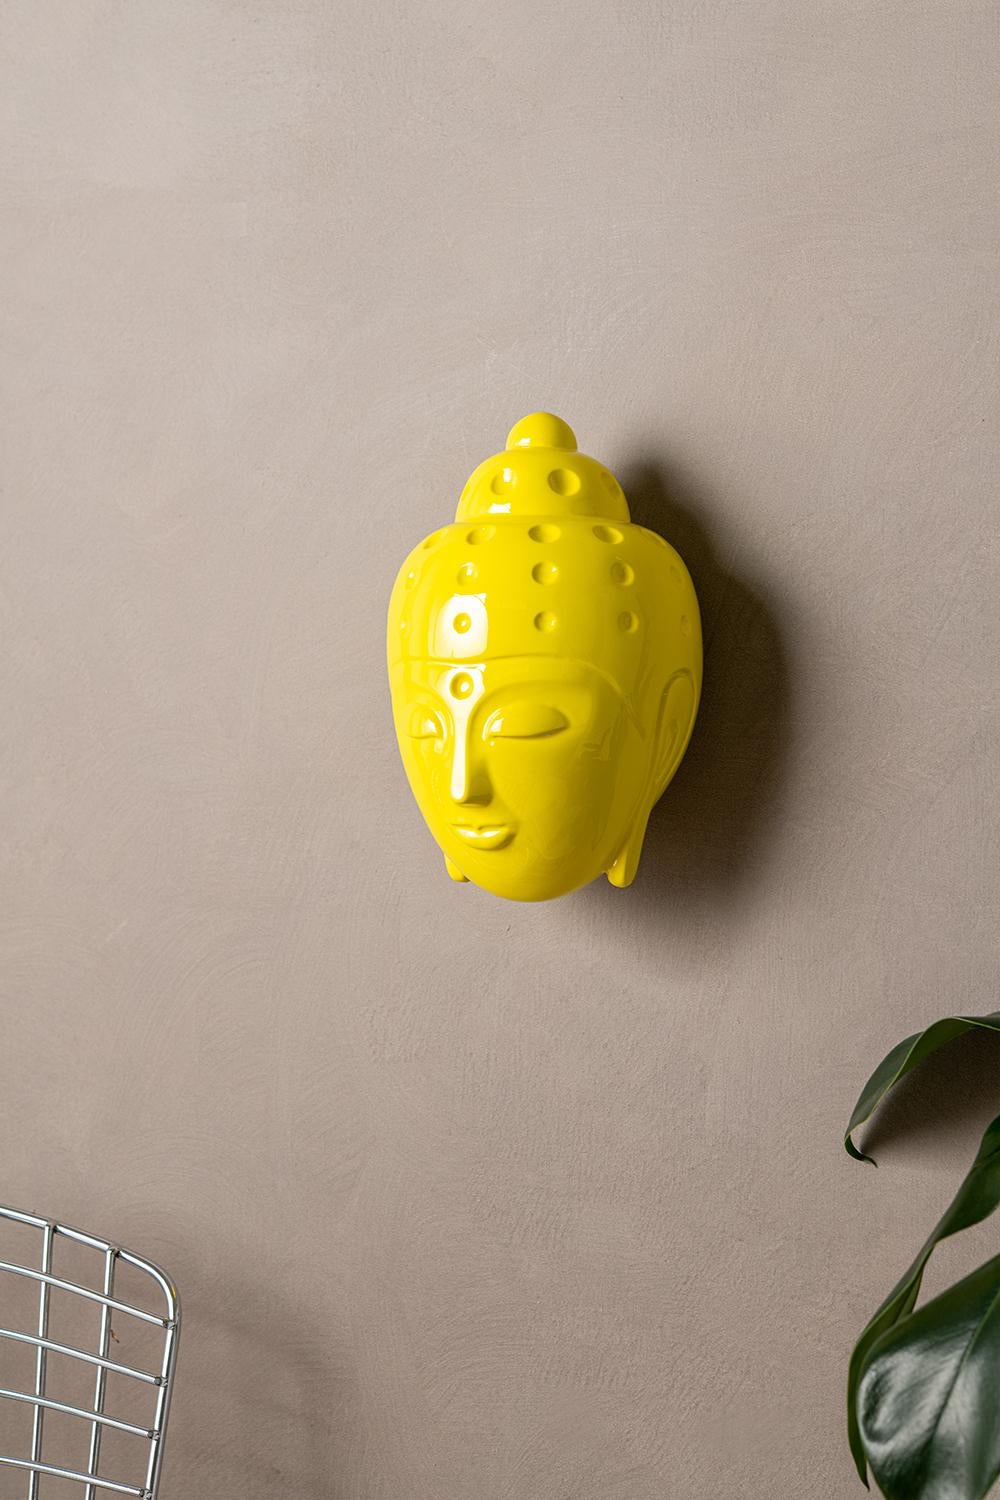 Contemporary buddha head sculpture - painted in yellow car paint - Yellow Figurative Sculpture by Tal Nehoray